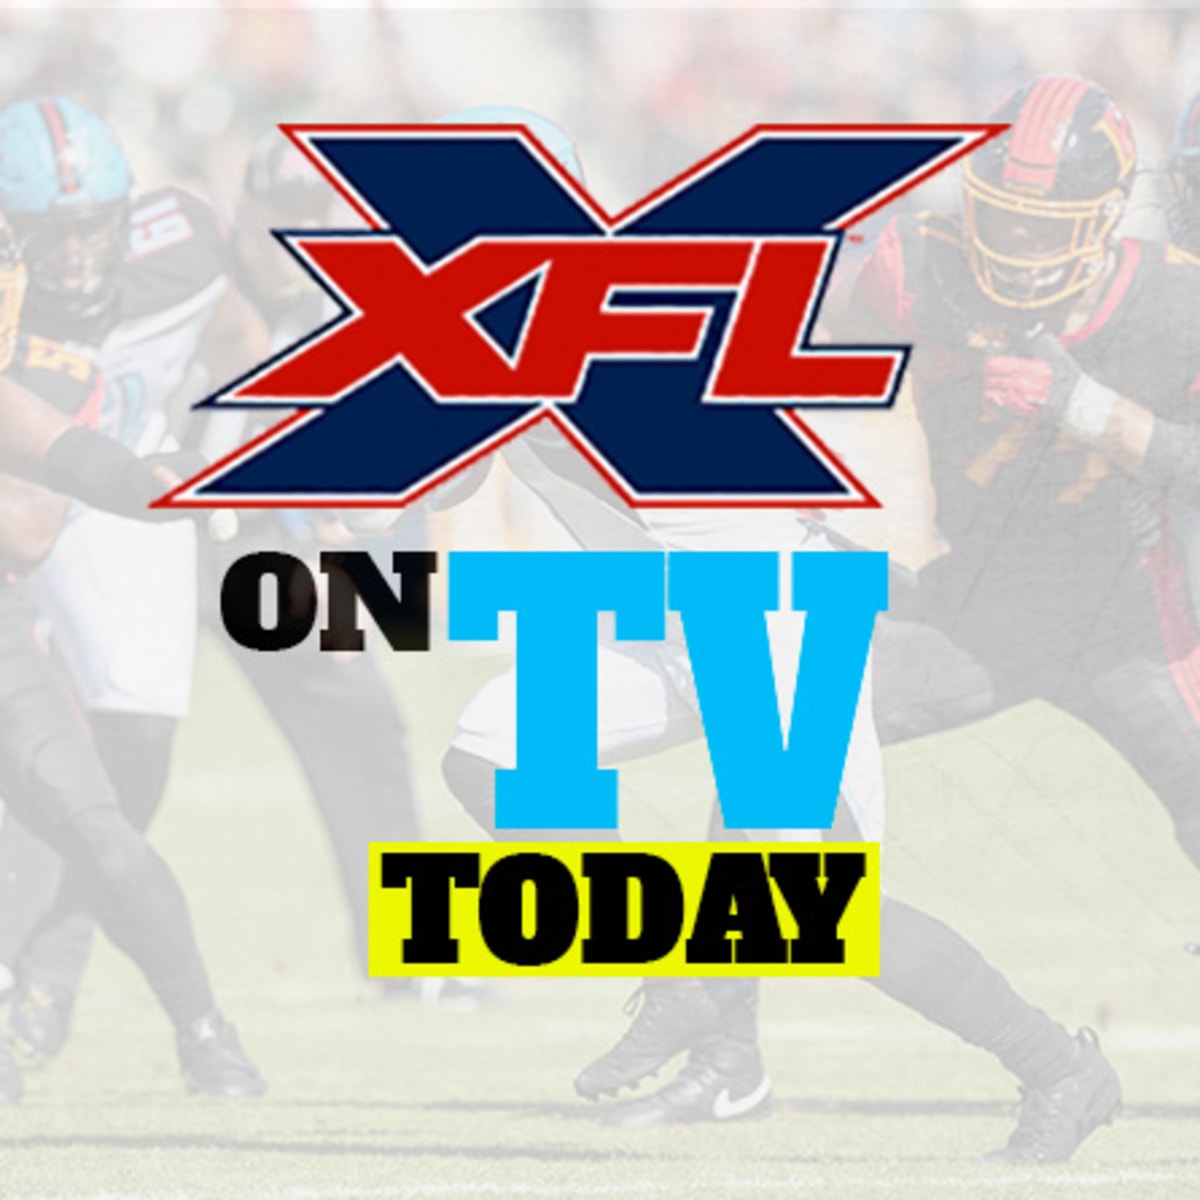 XFL Football Games on TV Today (Sunday, March 8) - AthlonSports